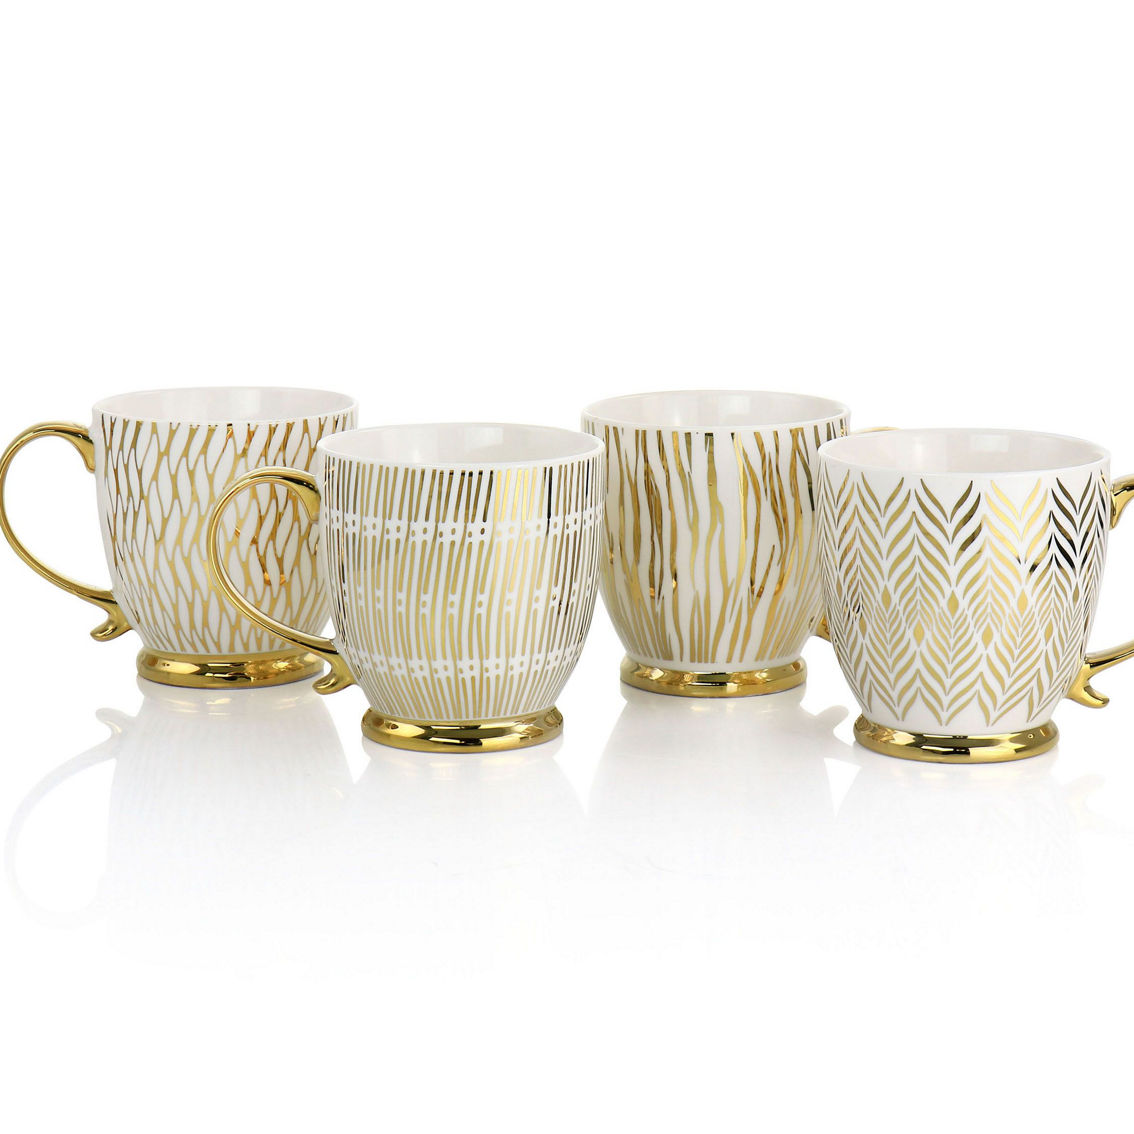 Gibson Home Gold Finch 4 Piece 16.7oz Electroplated Fine Ceramic Mug Set in Gold - Image 2 of 5